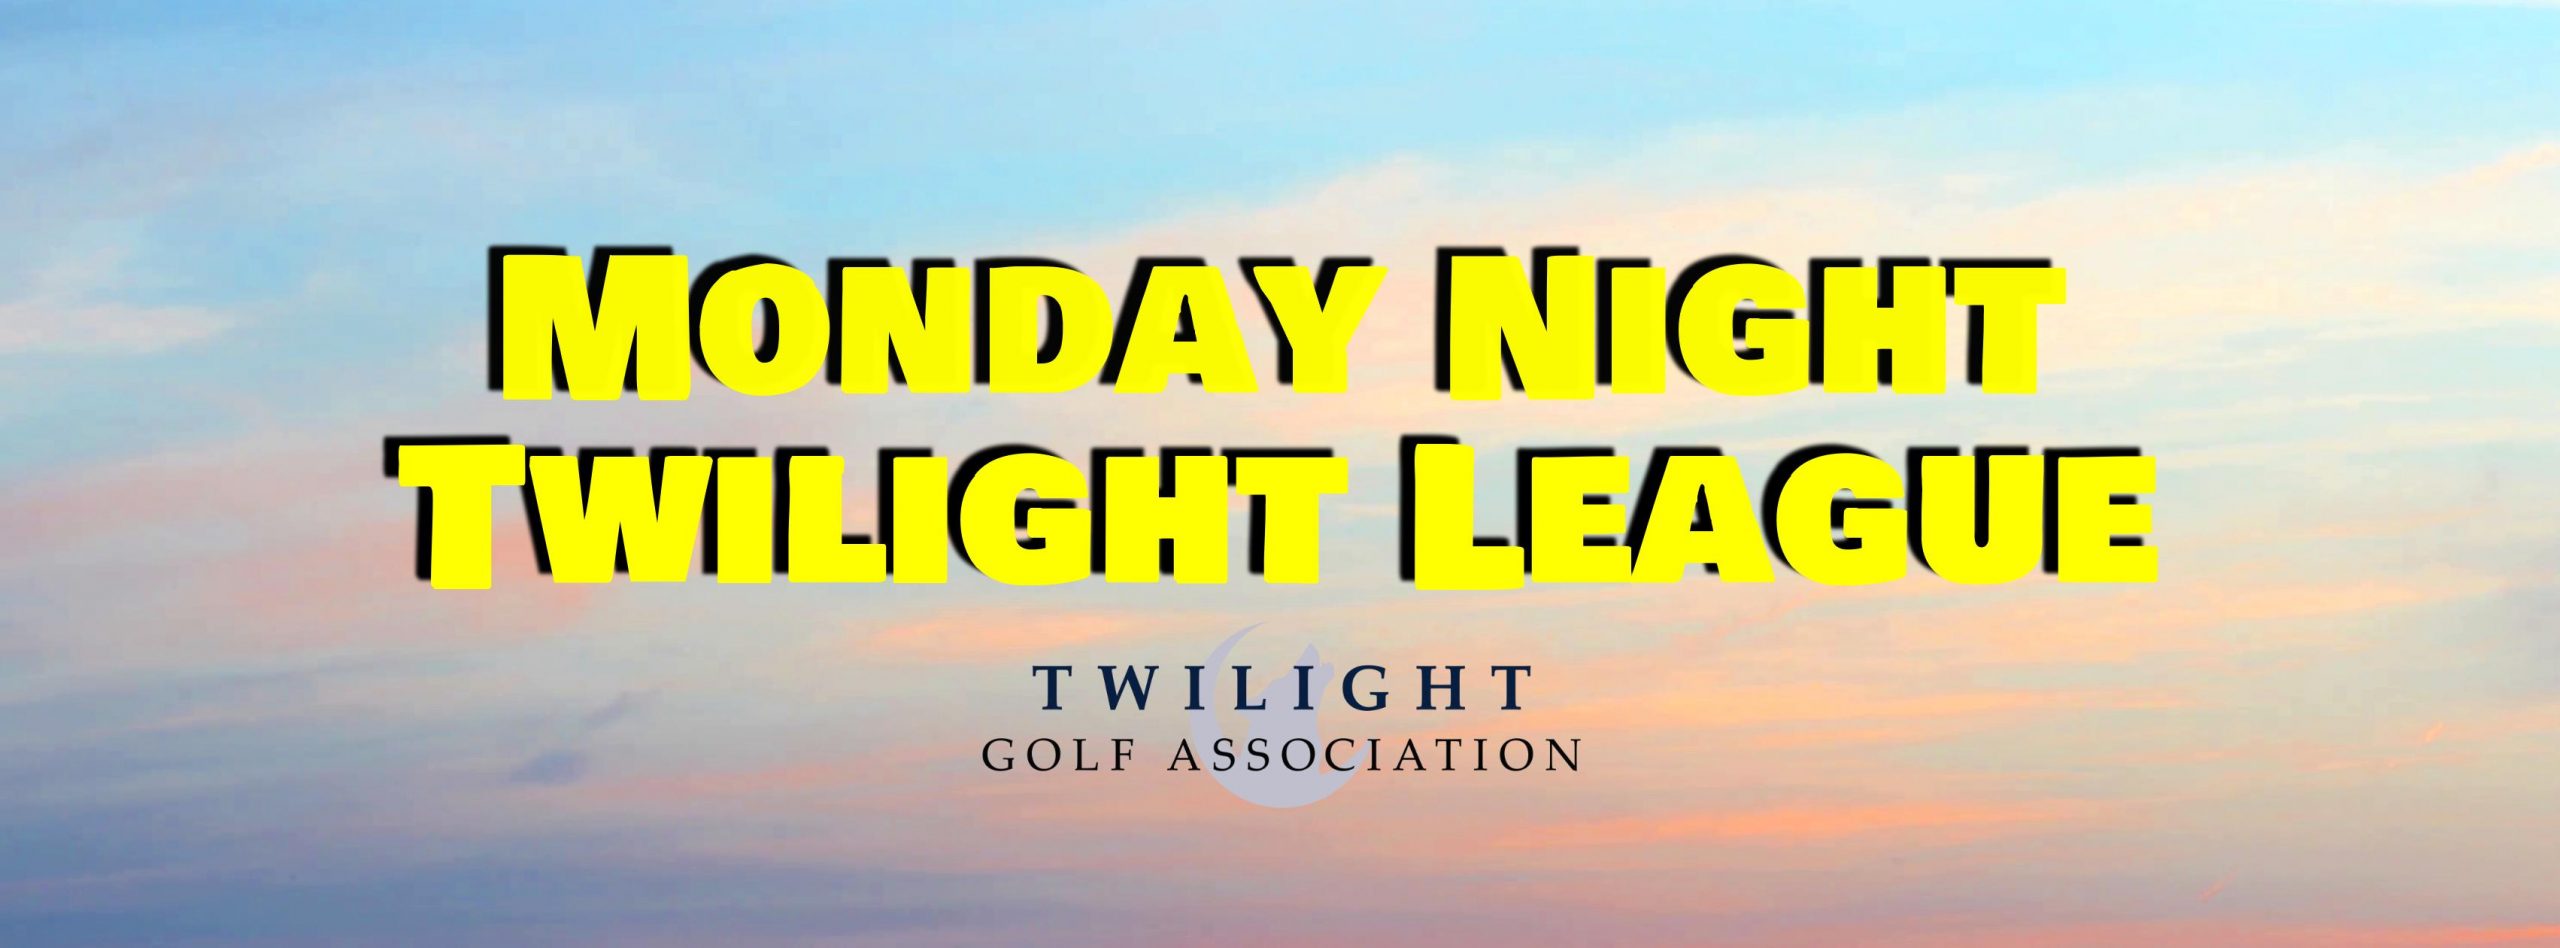 Monday Night Twilight League at Indian Spring Golf Course